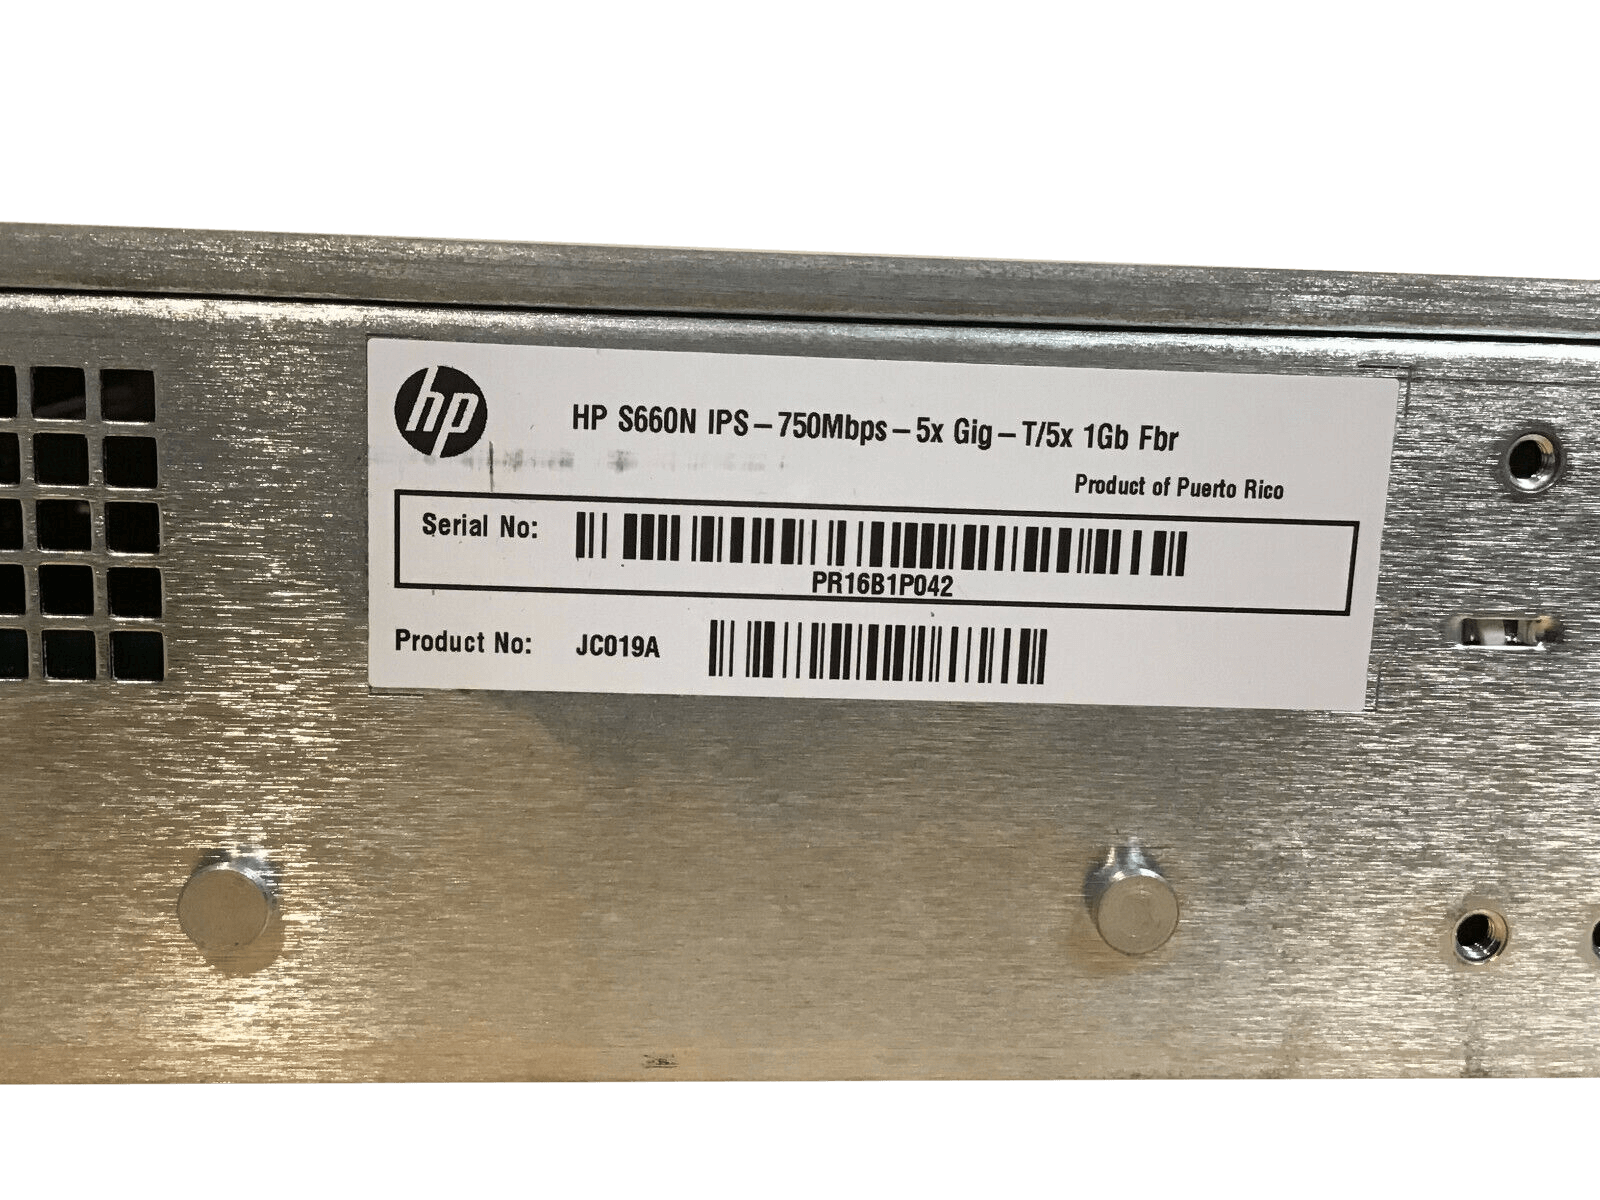 HP JC021A TippingPoint 660N IPS 2500N-50R1-6006 Intrustion Prevention System 10x RJ45 10x SFP 2x XFP.